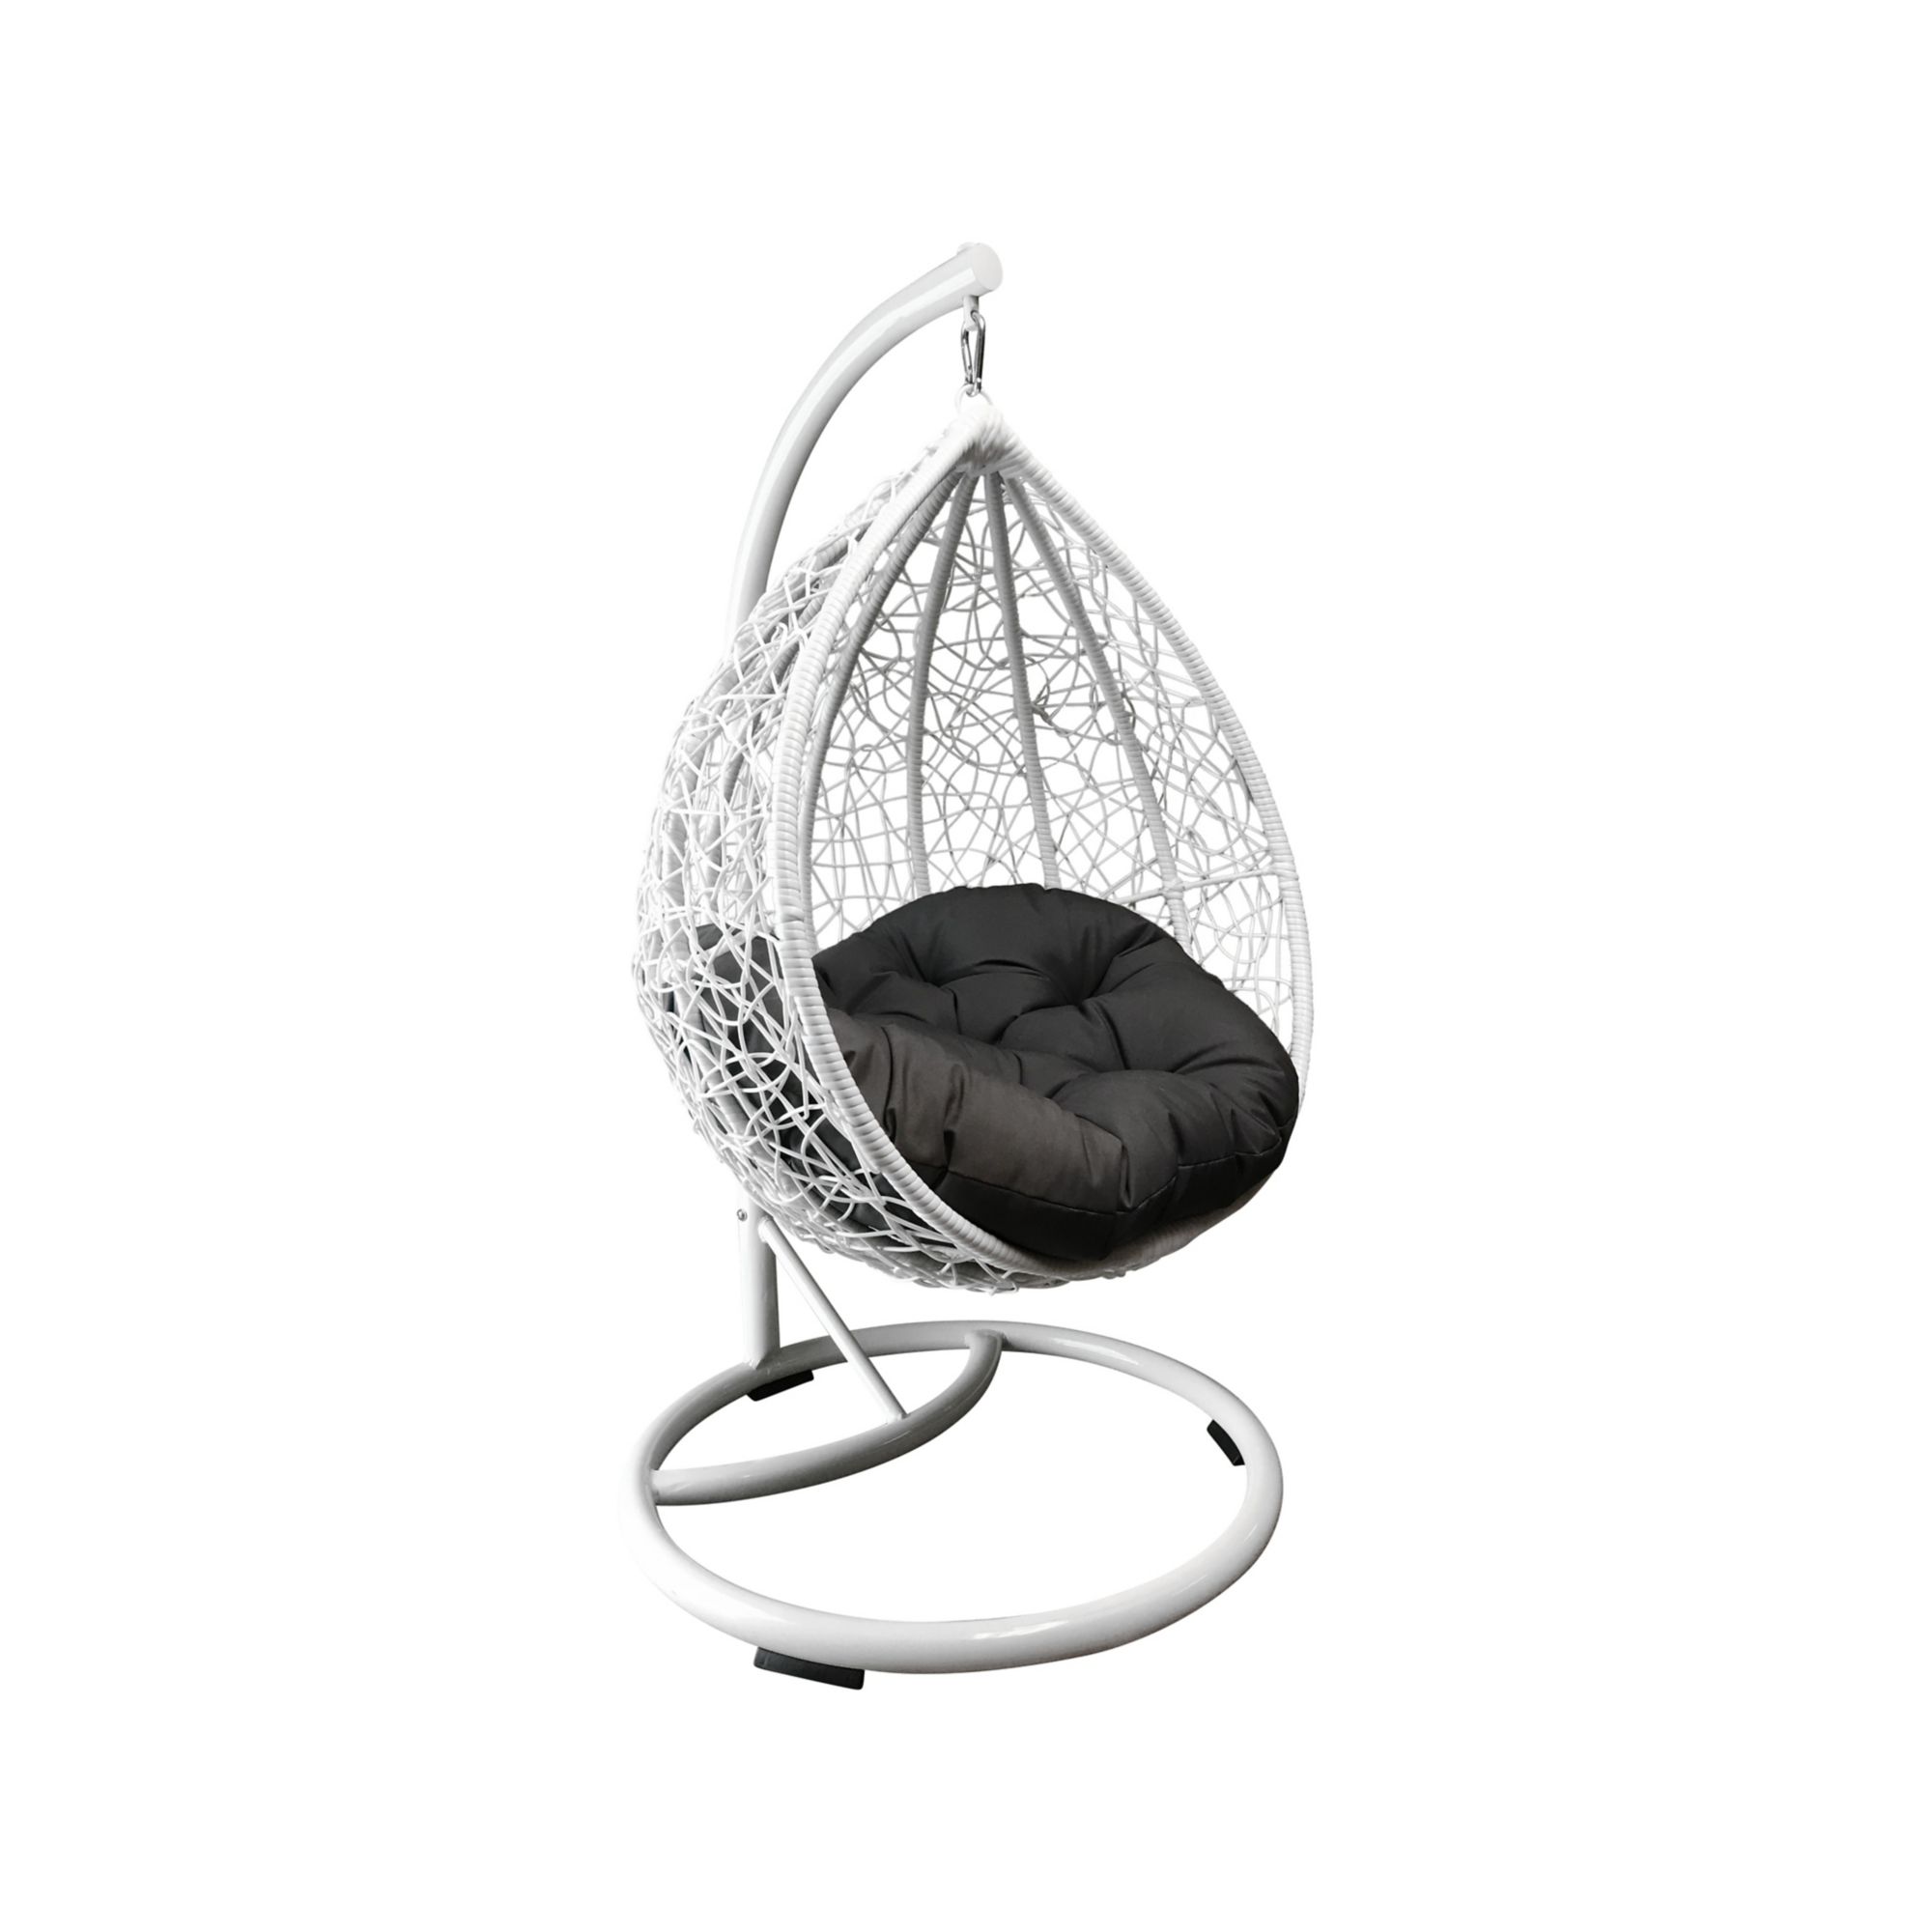 M&M Sales Swoon Pod Children's Hanging Chair with Stand - Grey Pillow